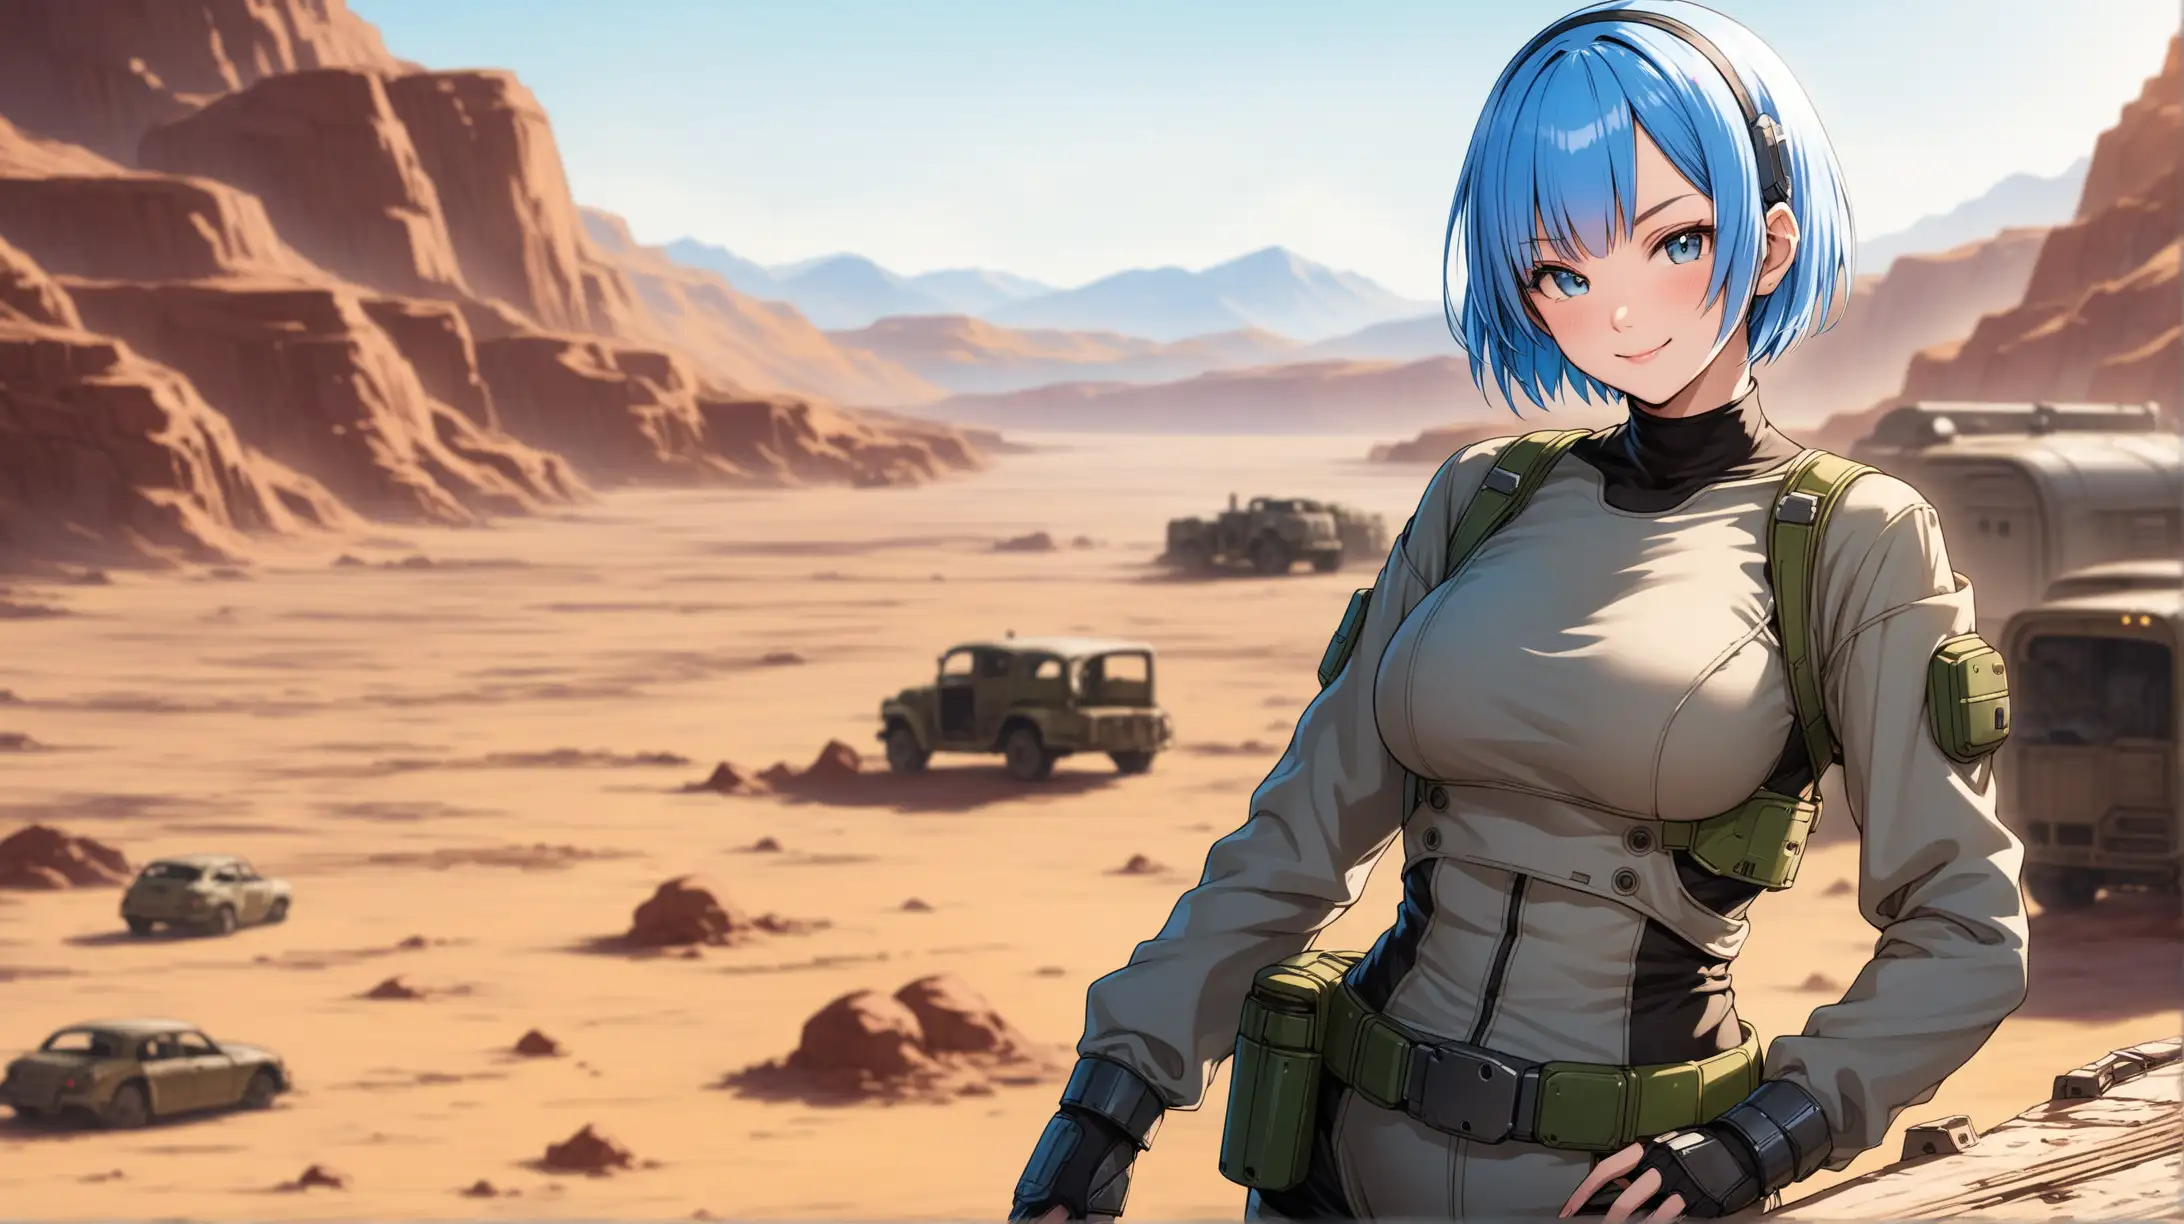 Draw the character Rem, high quality, in a relaxed pose, outdoors, wearing an outfit inspired from the Fallout series, smiling at the viewer